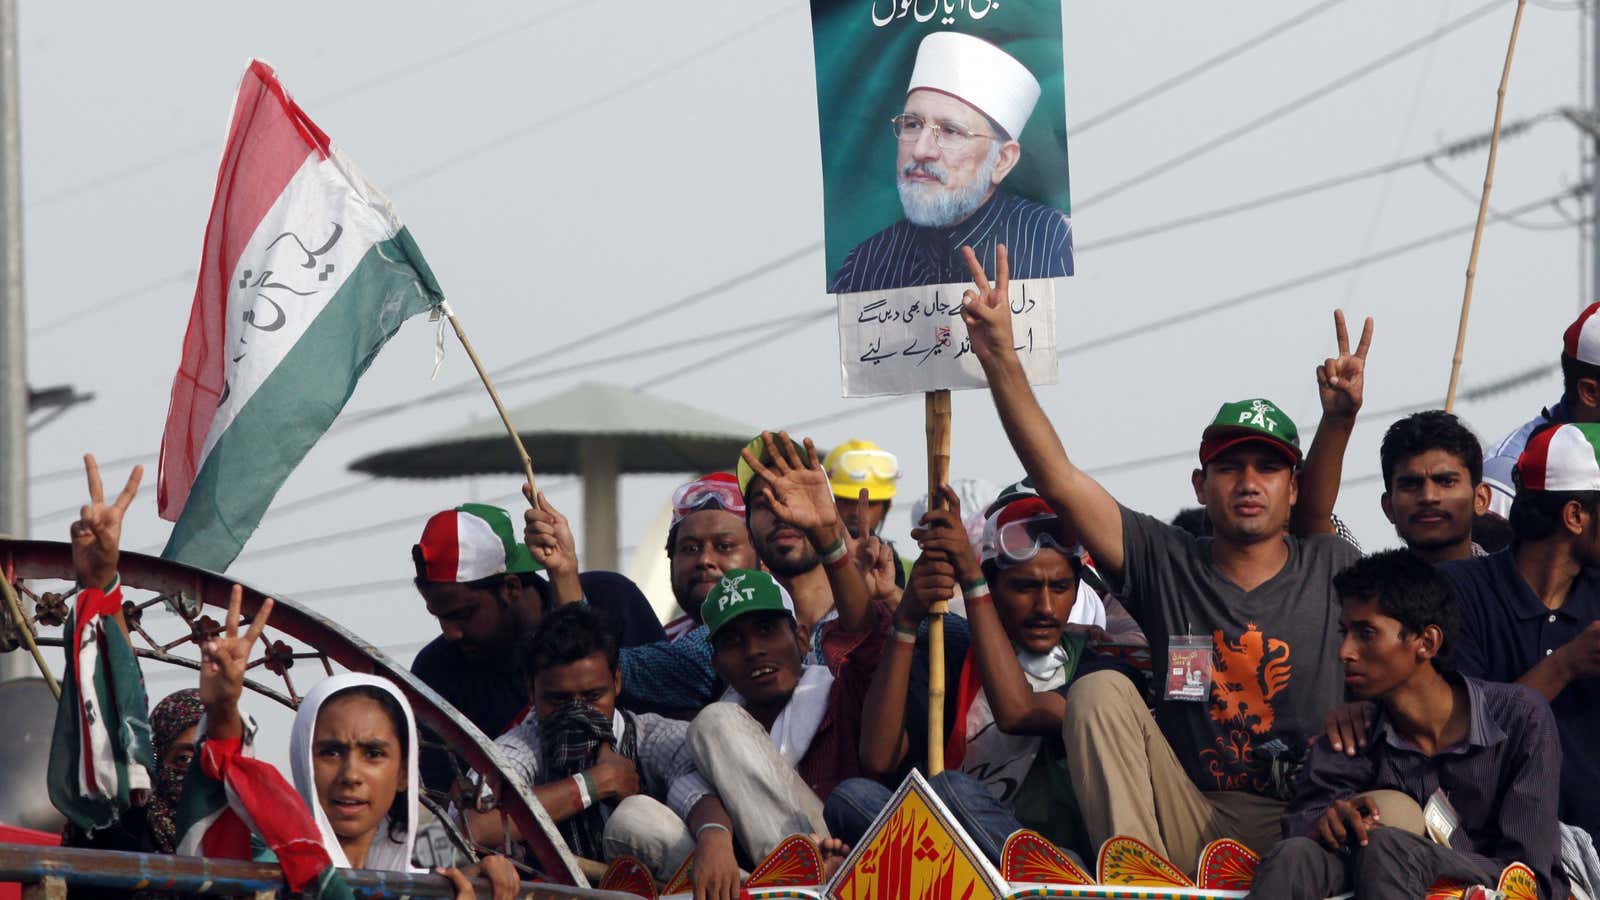 Supporters of cleric Dr. Muhammad Tahir-ul-Qadri begin their march to Islamabad.